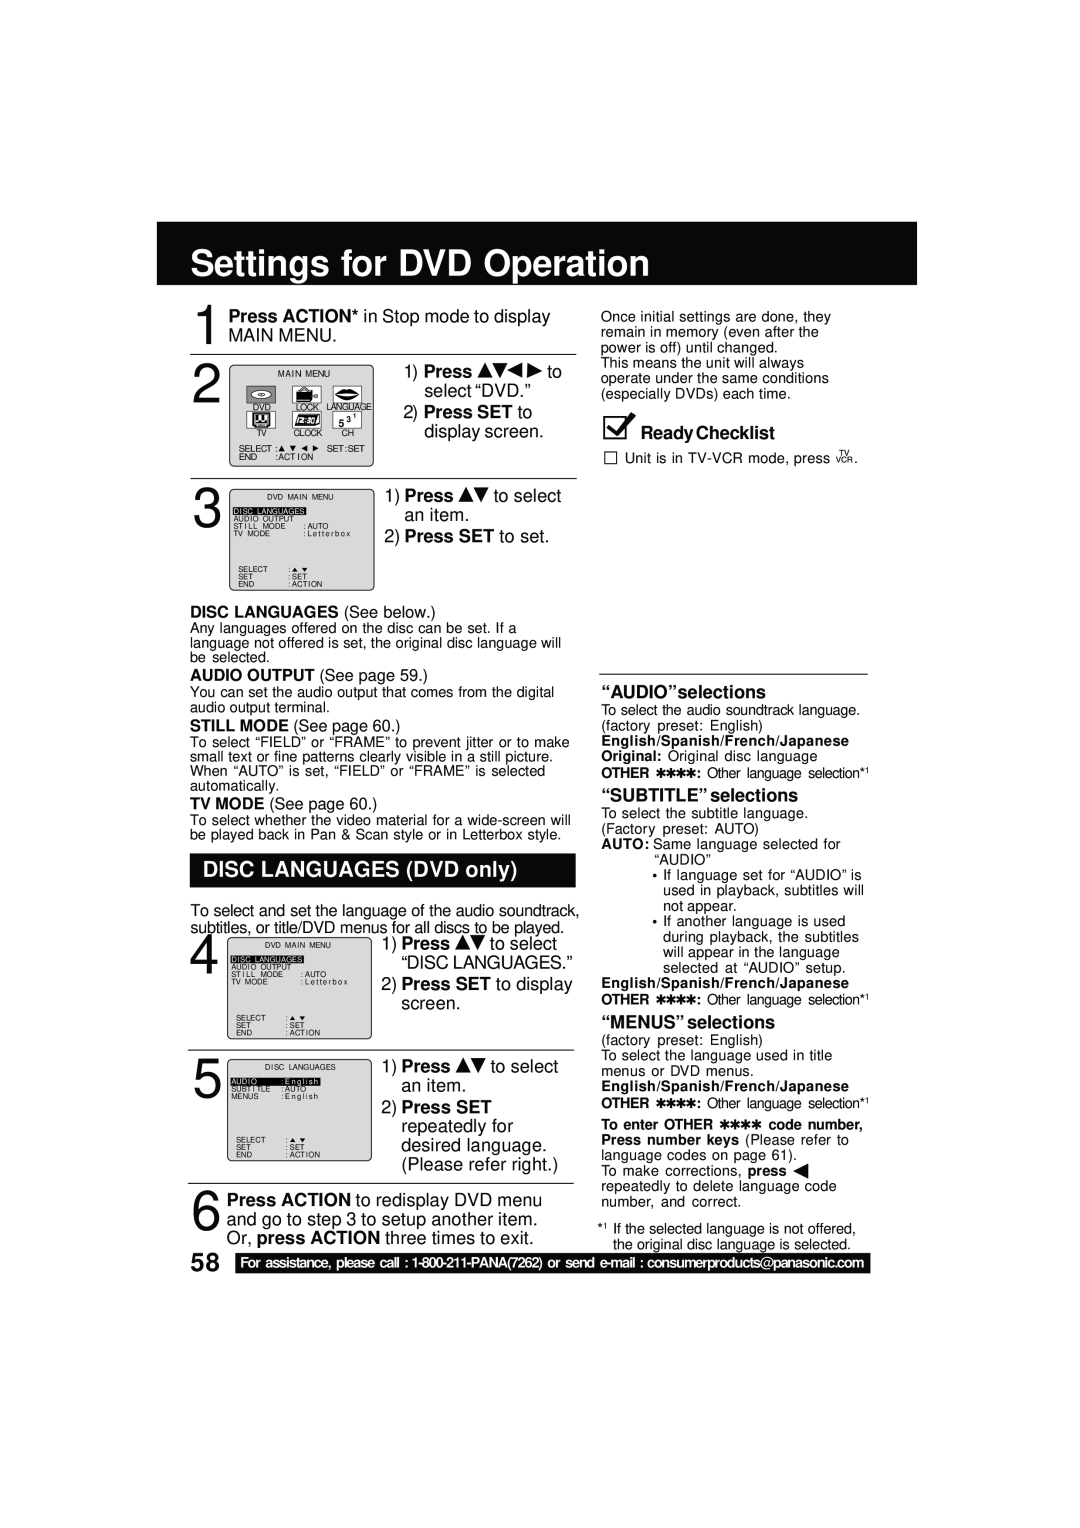 Panasonic PV DM2092 Settings for DVD Operation, DISC LANGUAGES DVD only, “AUDIO”selections, “SUBTITLE” selections, Press 